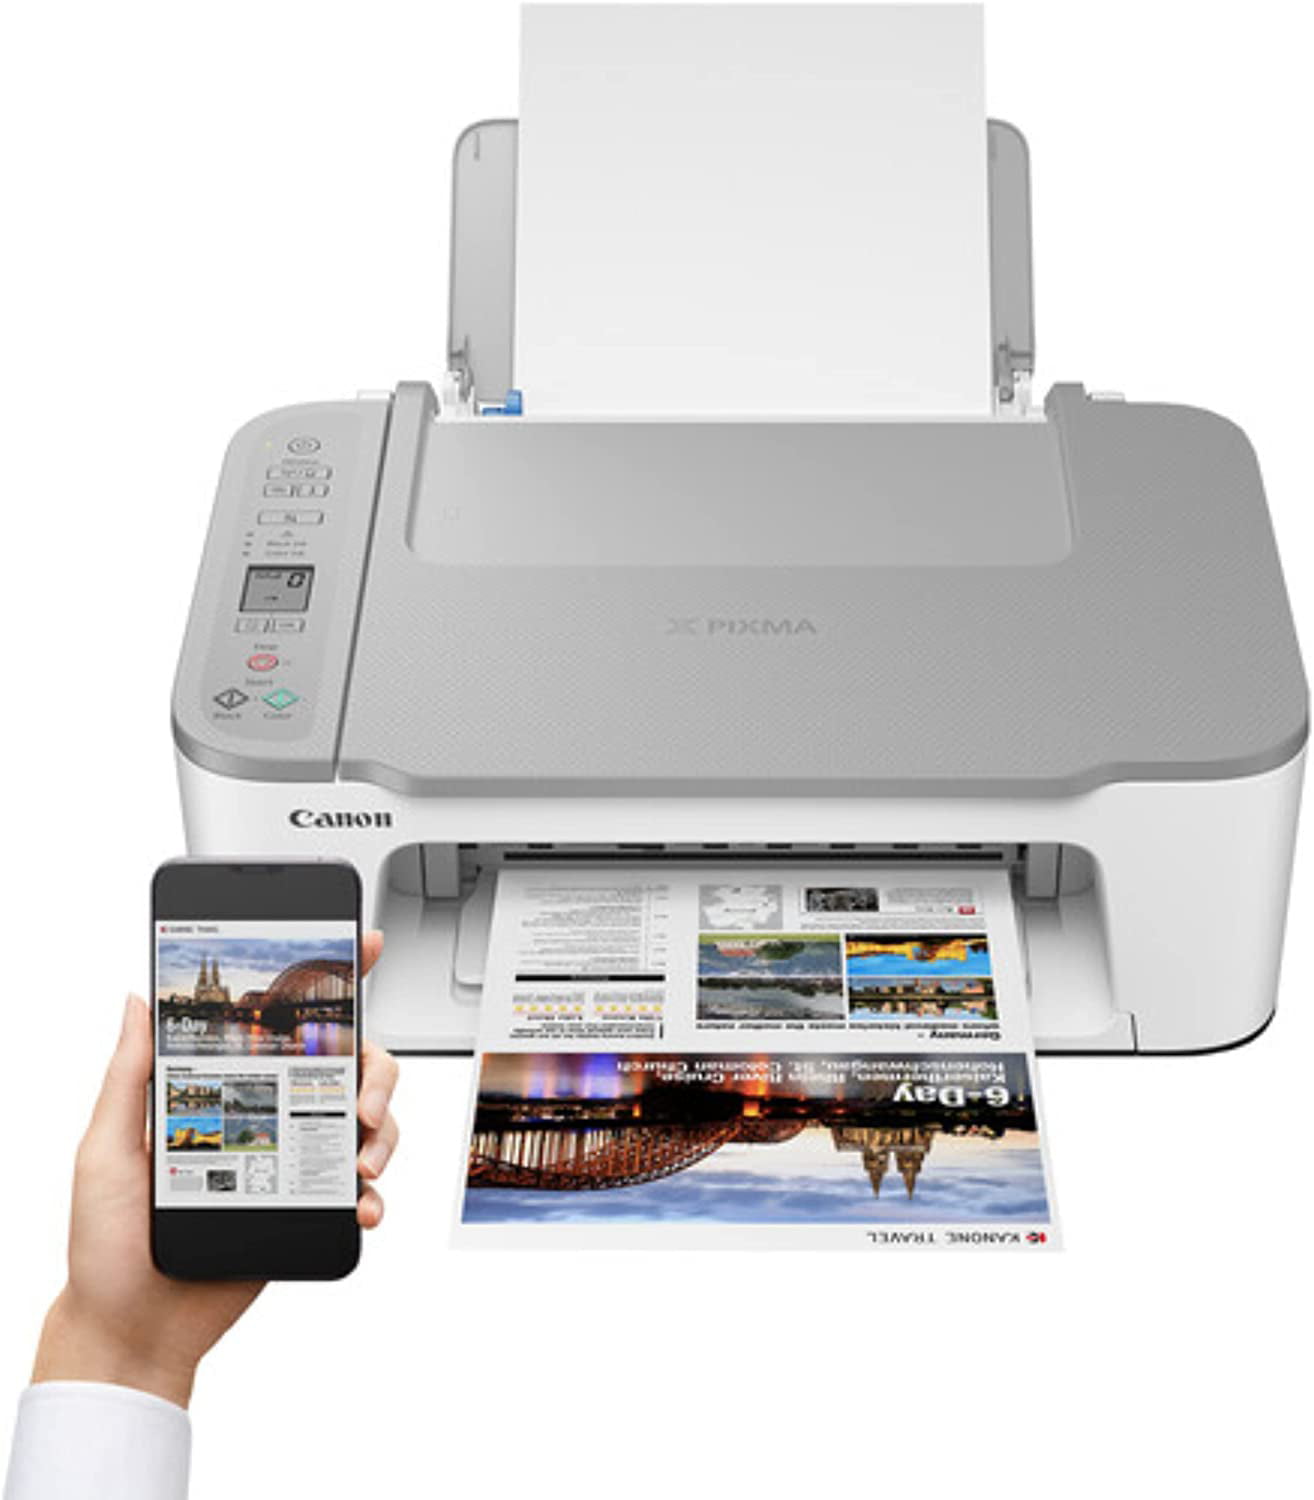 Laptop Canon Wireless Inkjet All-in-One Printer with LCD Screen Print Scan and Copy Tablet Built-in WiFi Wireless Printing from Android White and Smartphone with 6 Ft NeeGo Printer Cable 